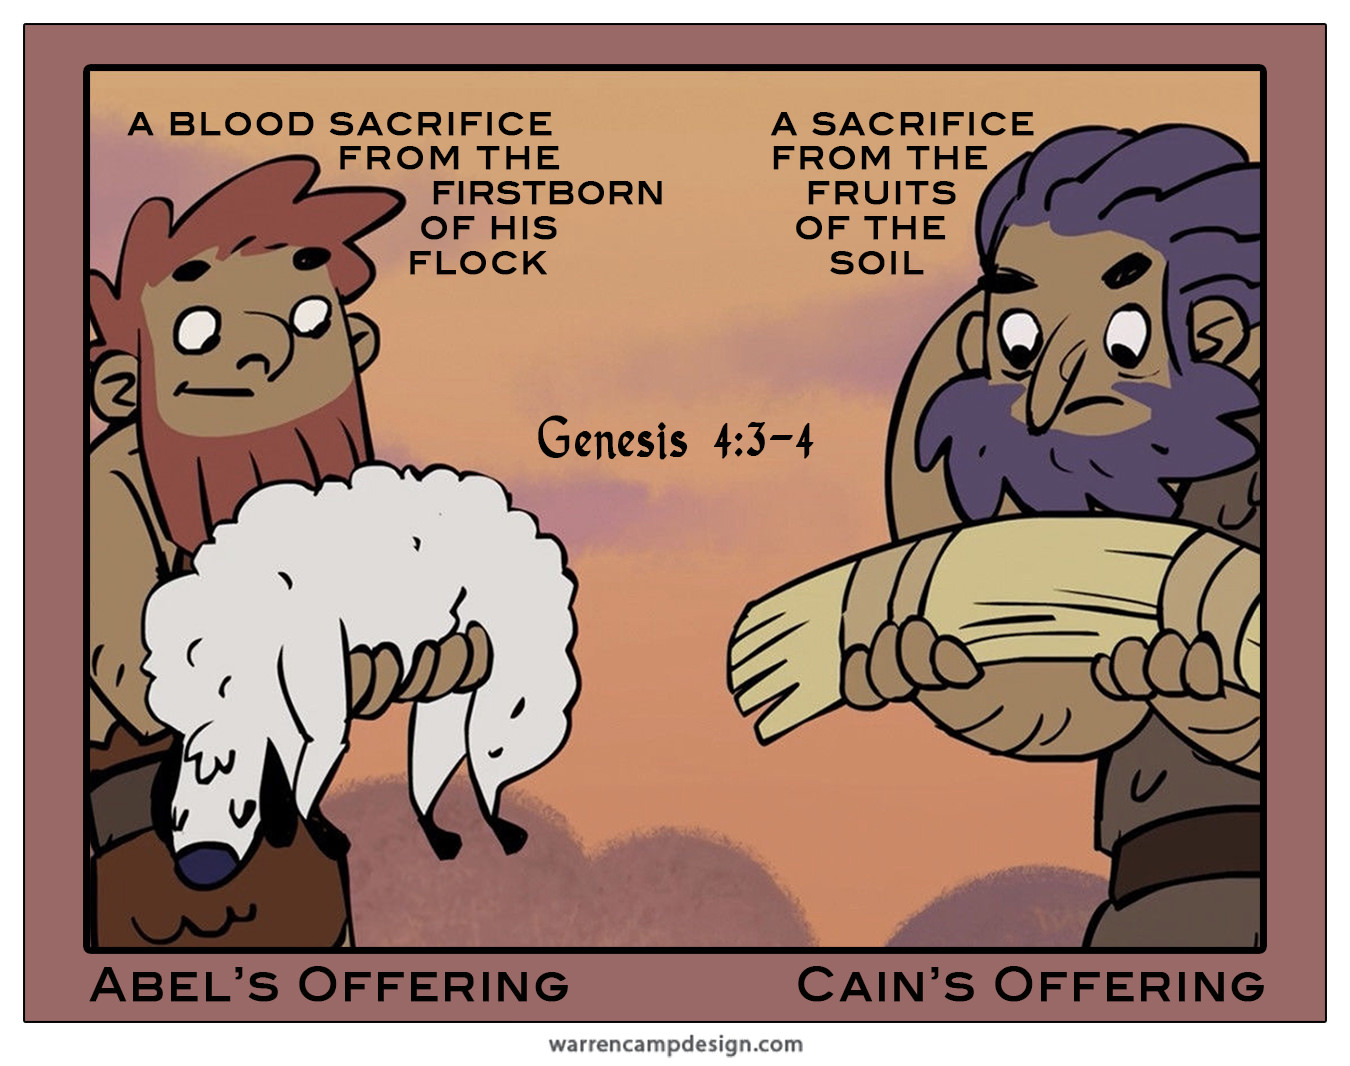 Warren Camp's Scripture picture of Genesis 4:3-4, comparing the sacrifices that Abel and Cain made to Yahweh